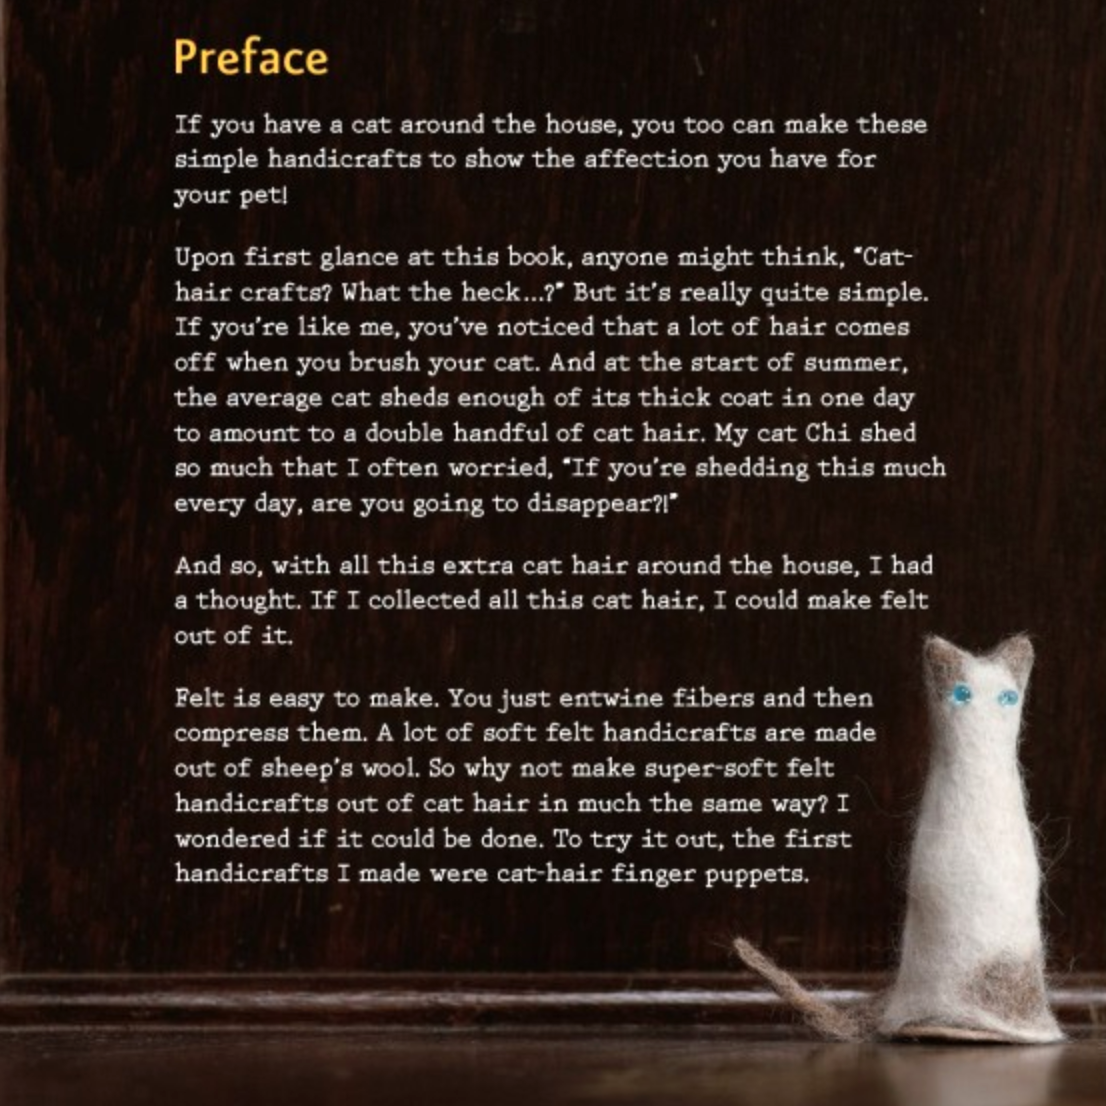 Crafting With Cat Hair book preface with miniature cat hair cat project